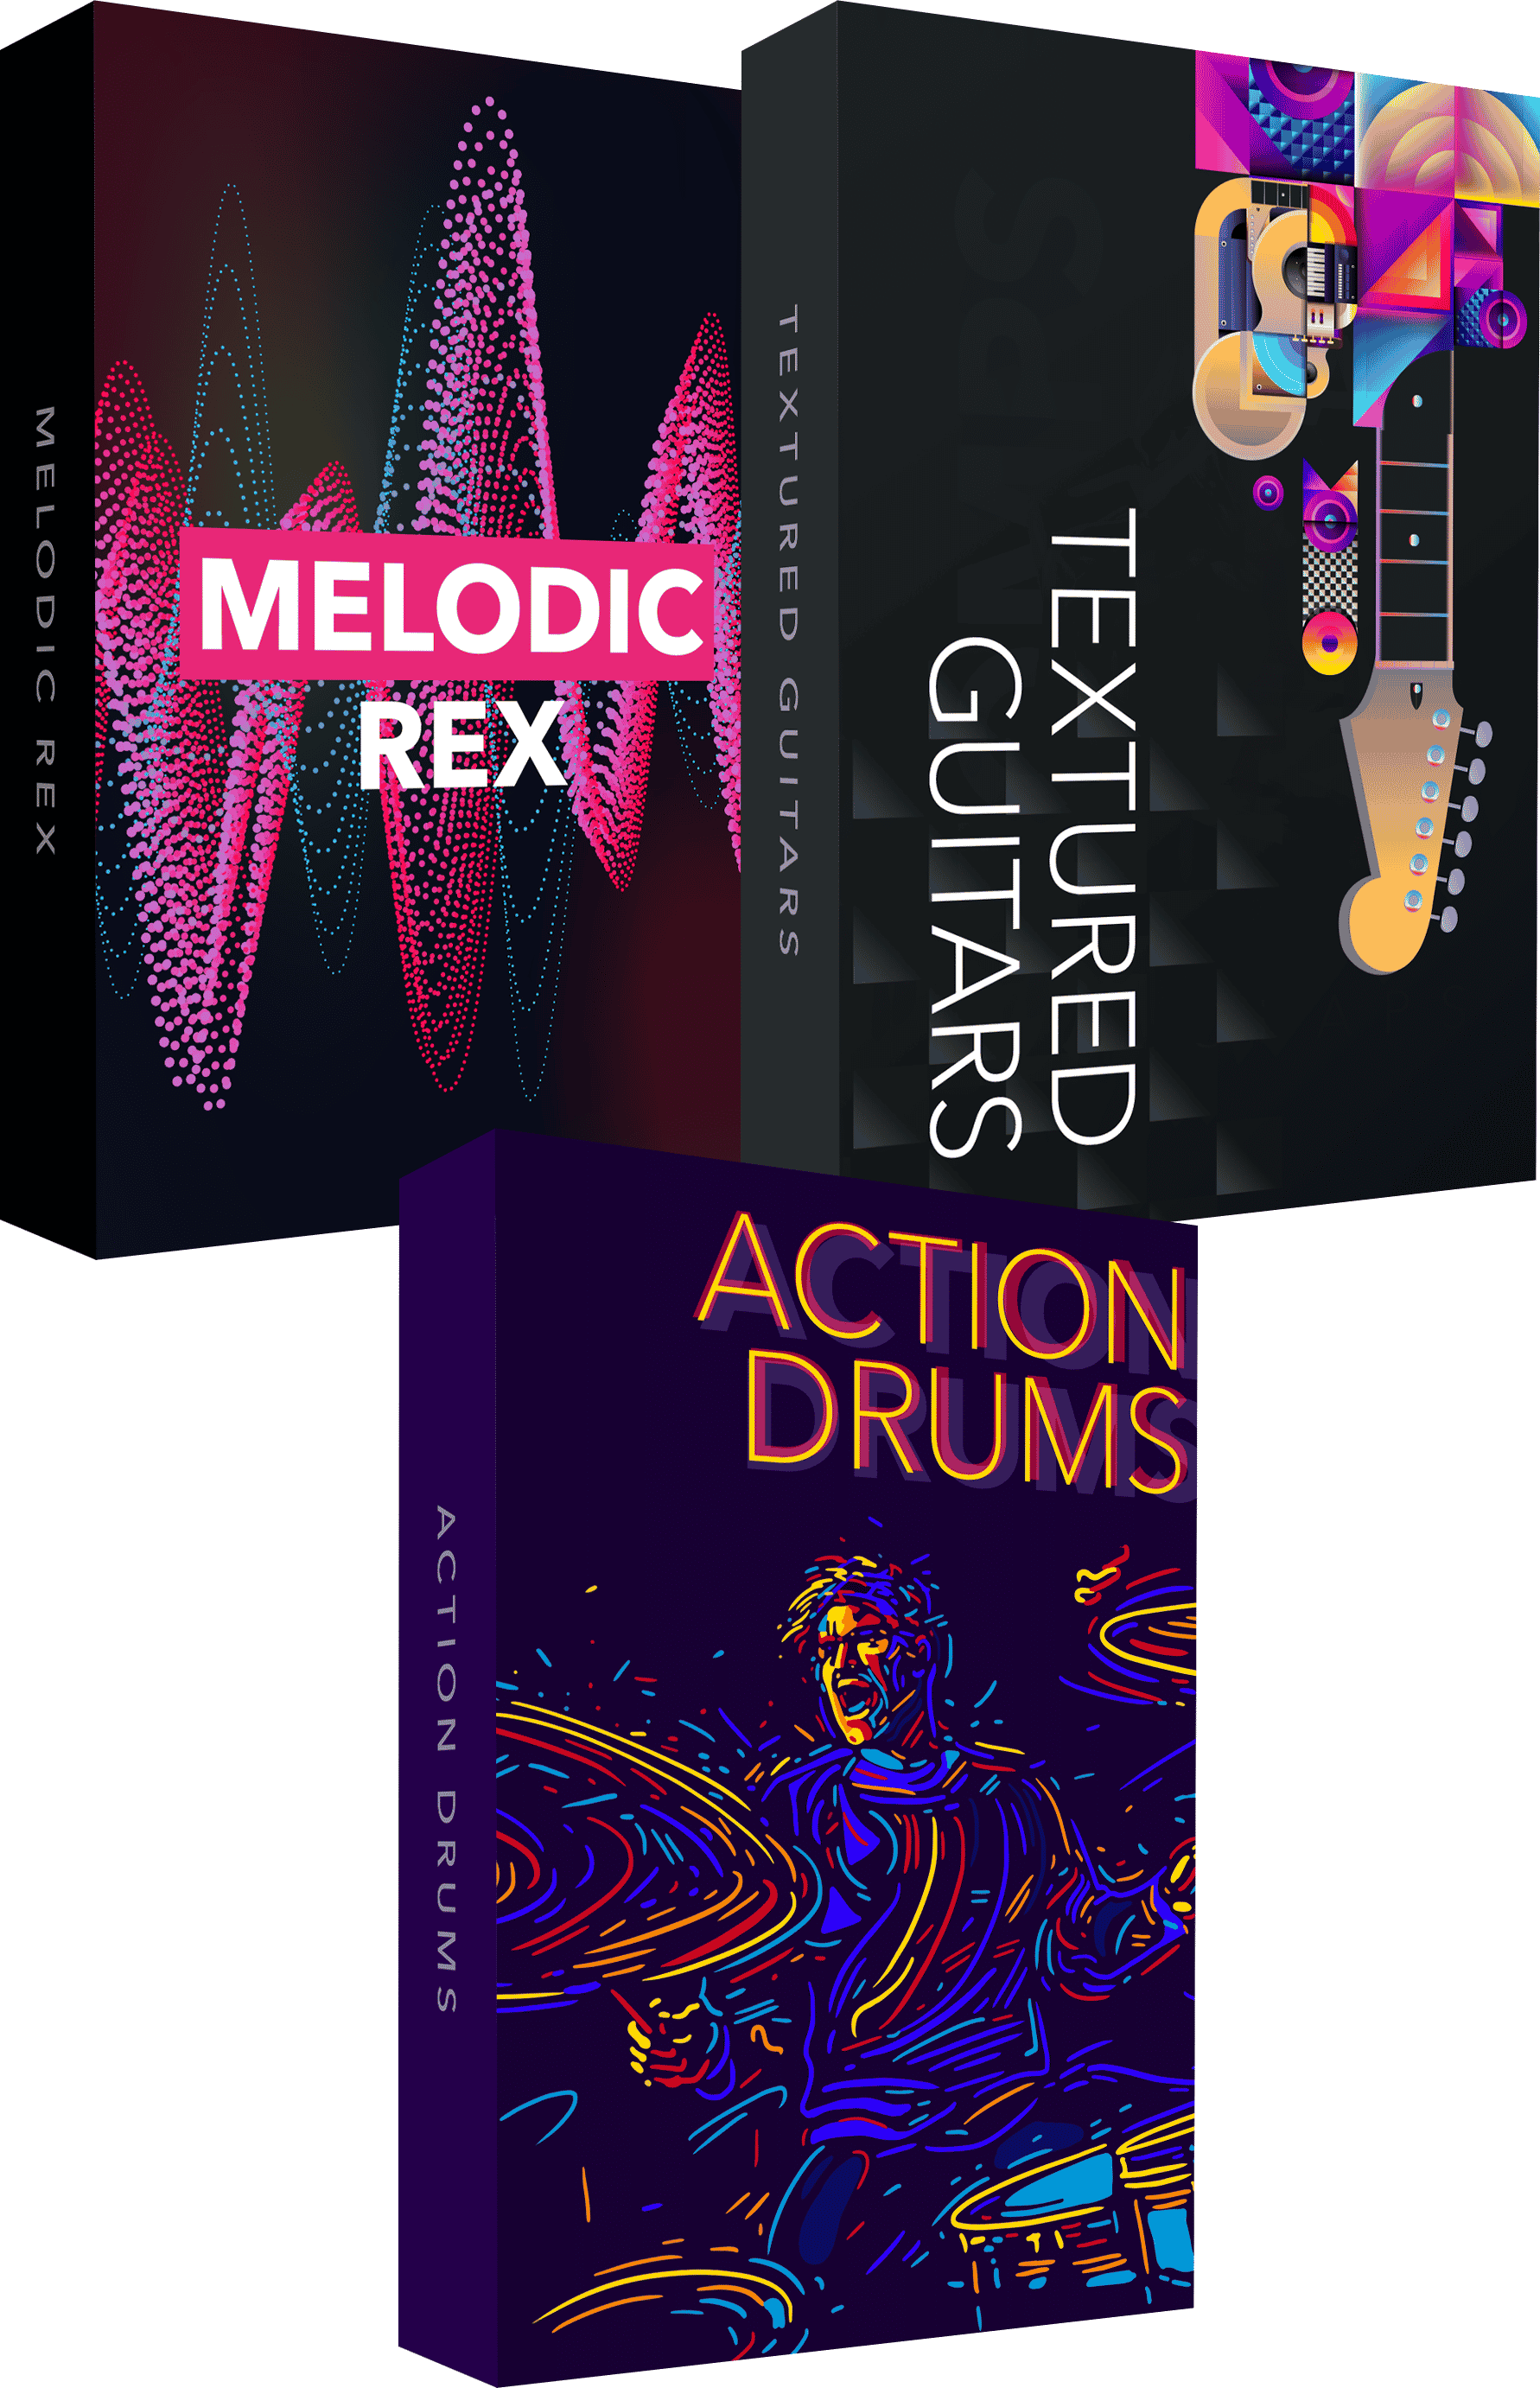 Rmx library free download stylus indian Bollywood Sample